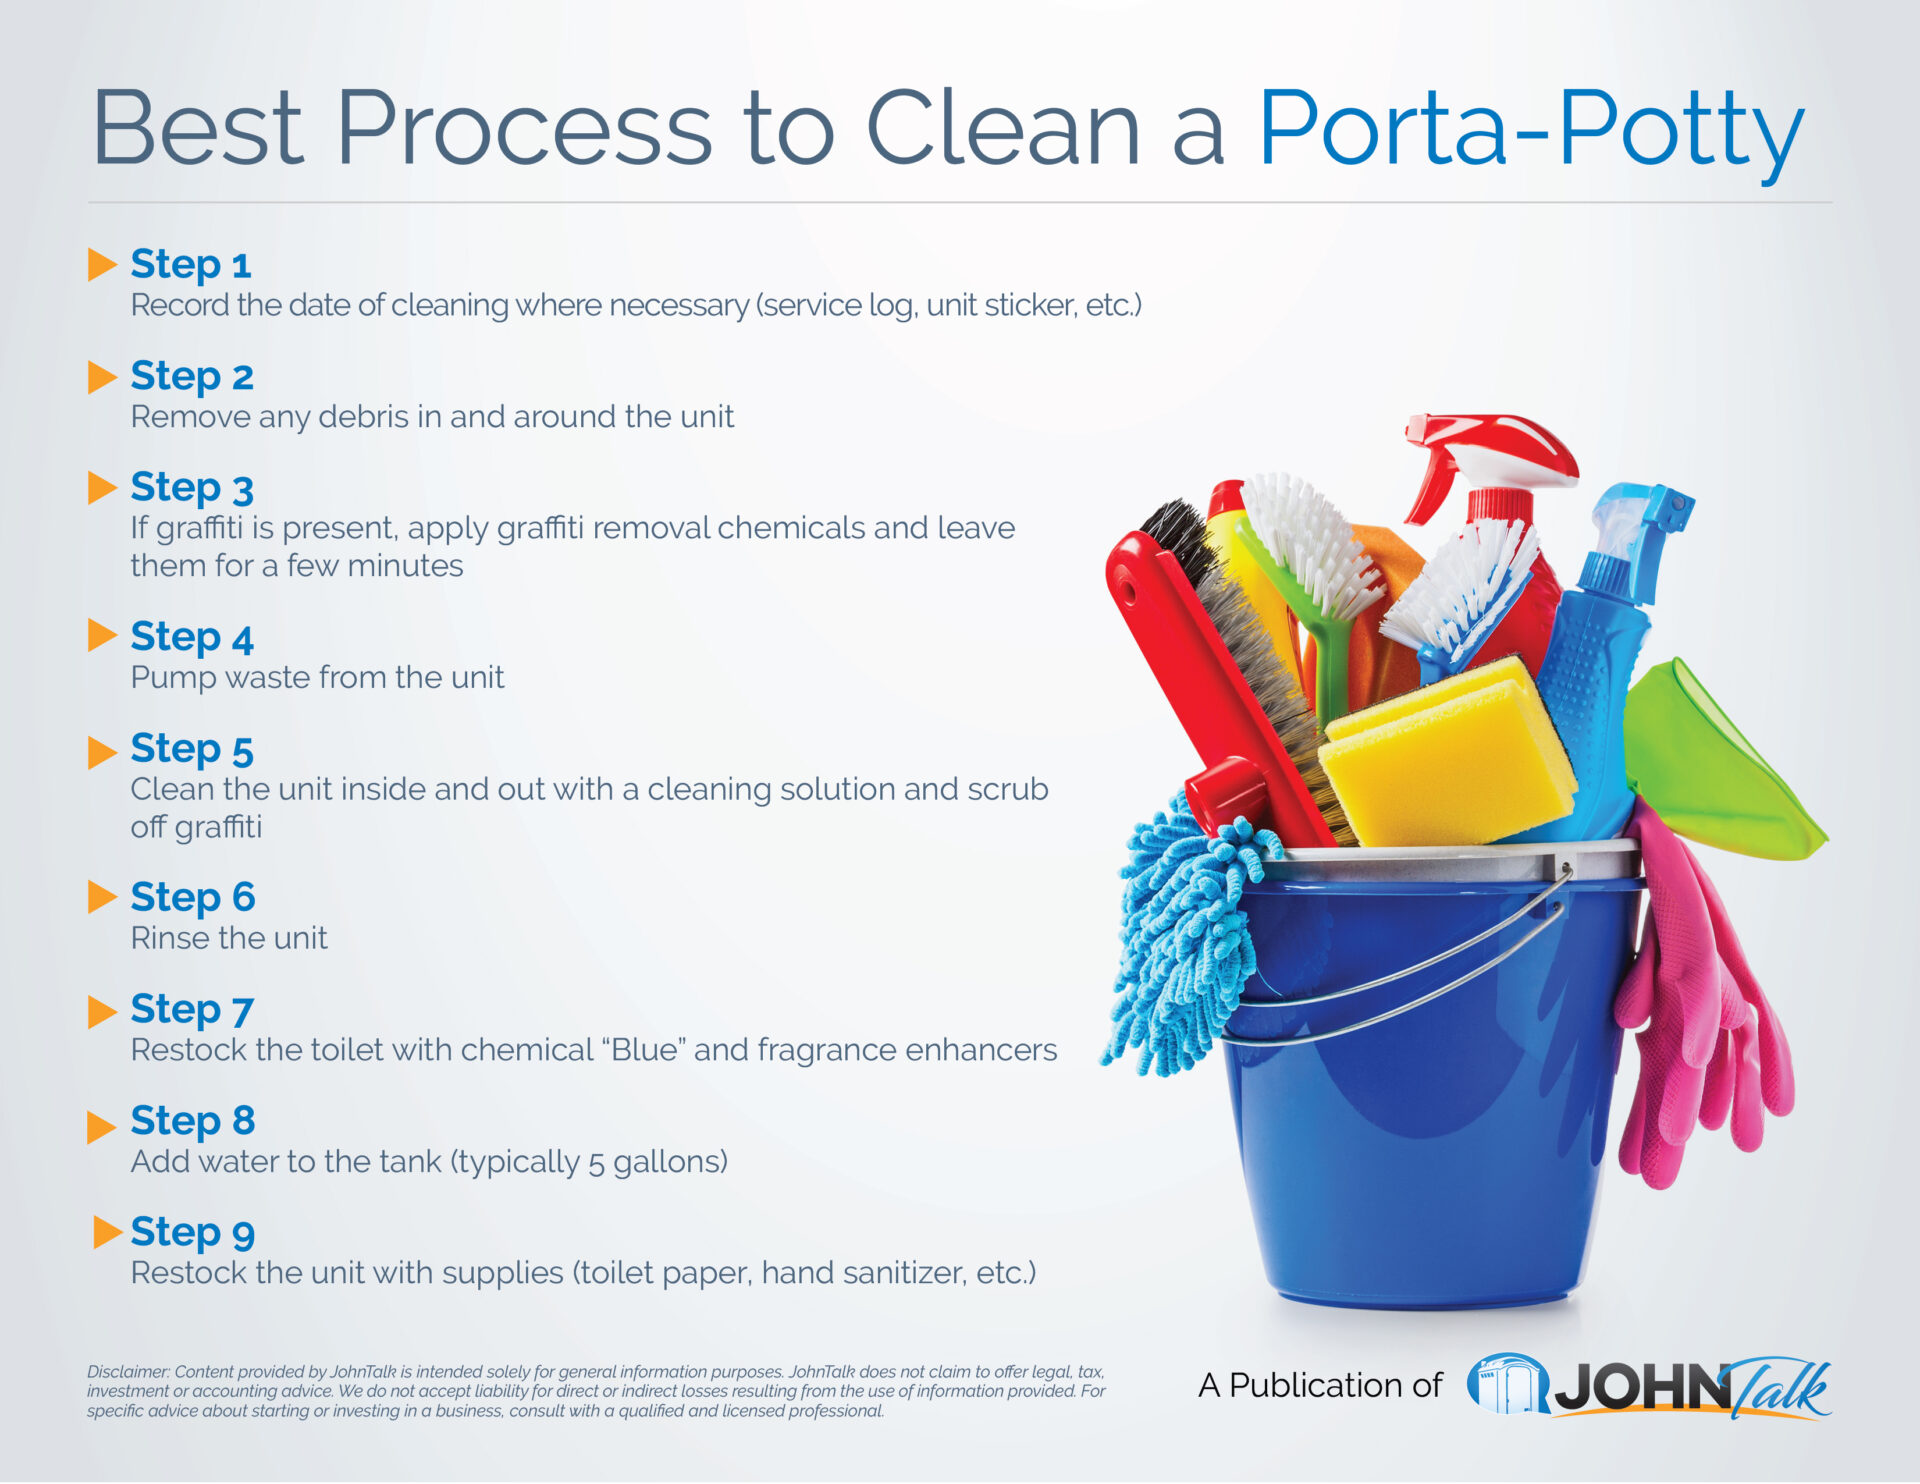 Best Process to Clean a Porta-Potty